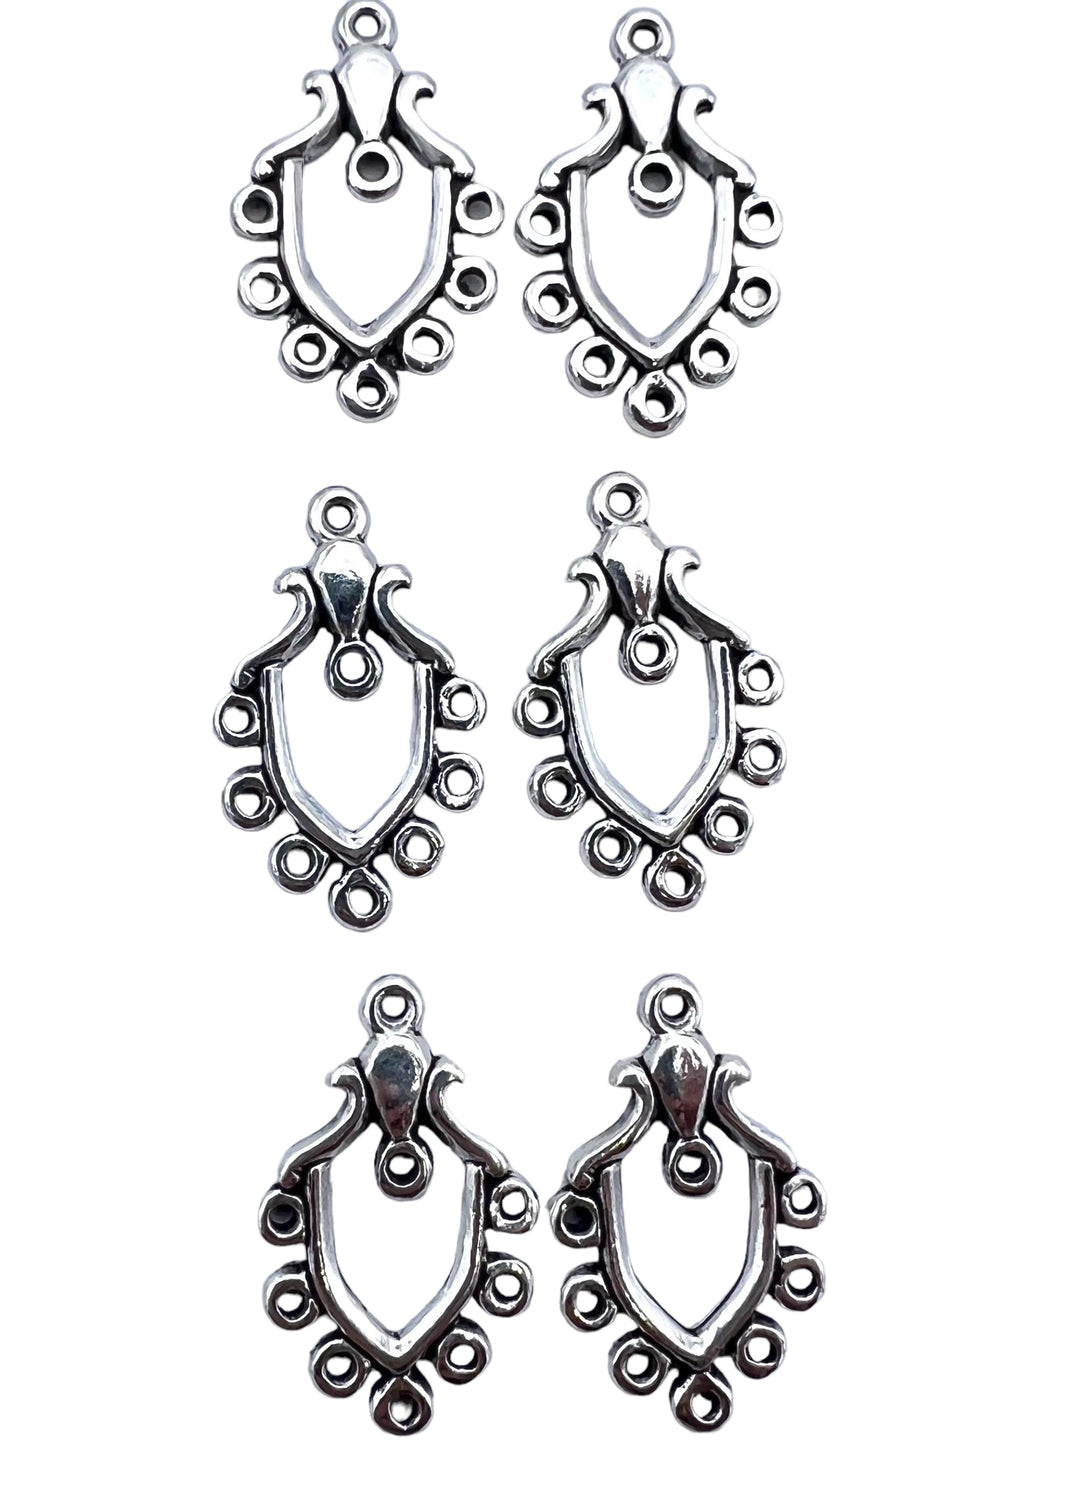 Oxidized Sterling Silver Earring Components for Chandelier